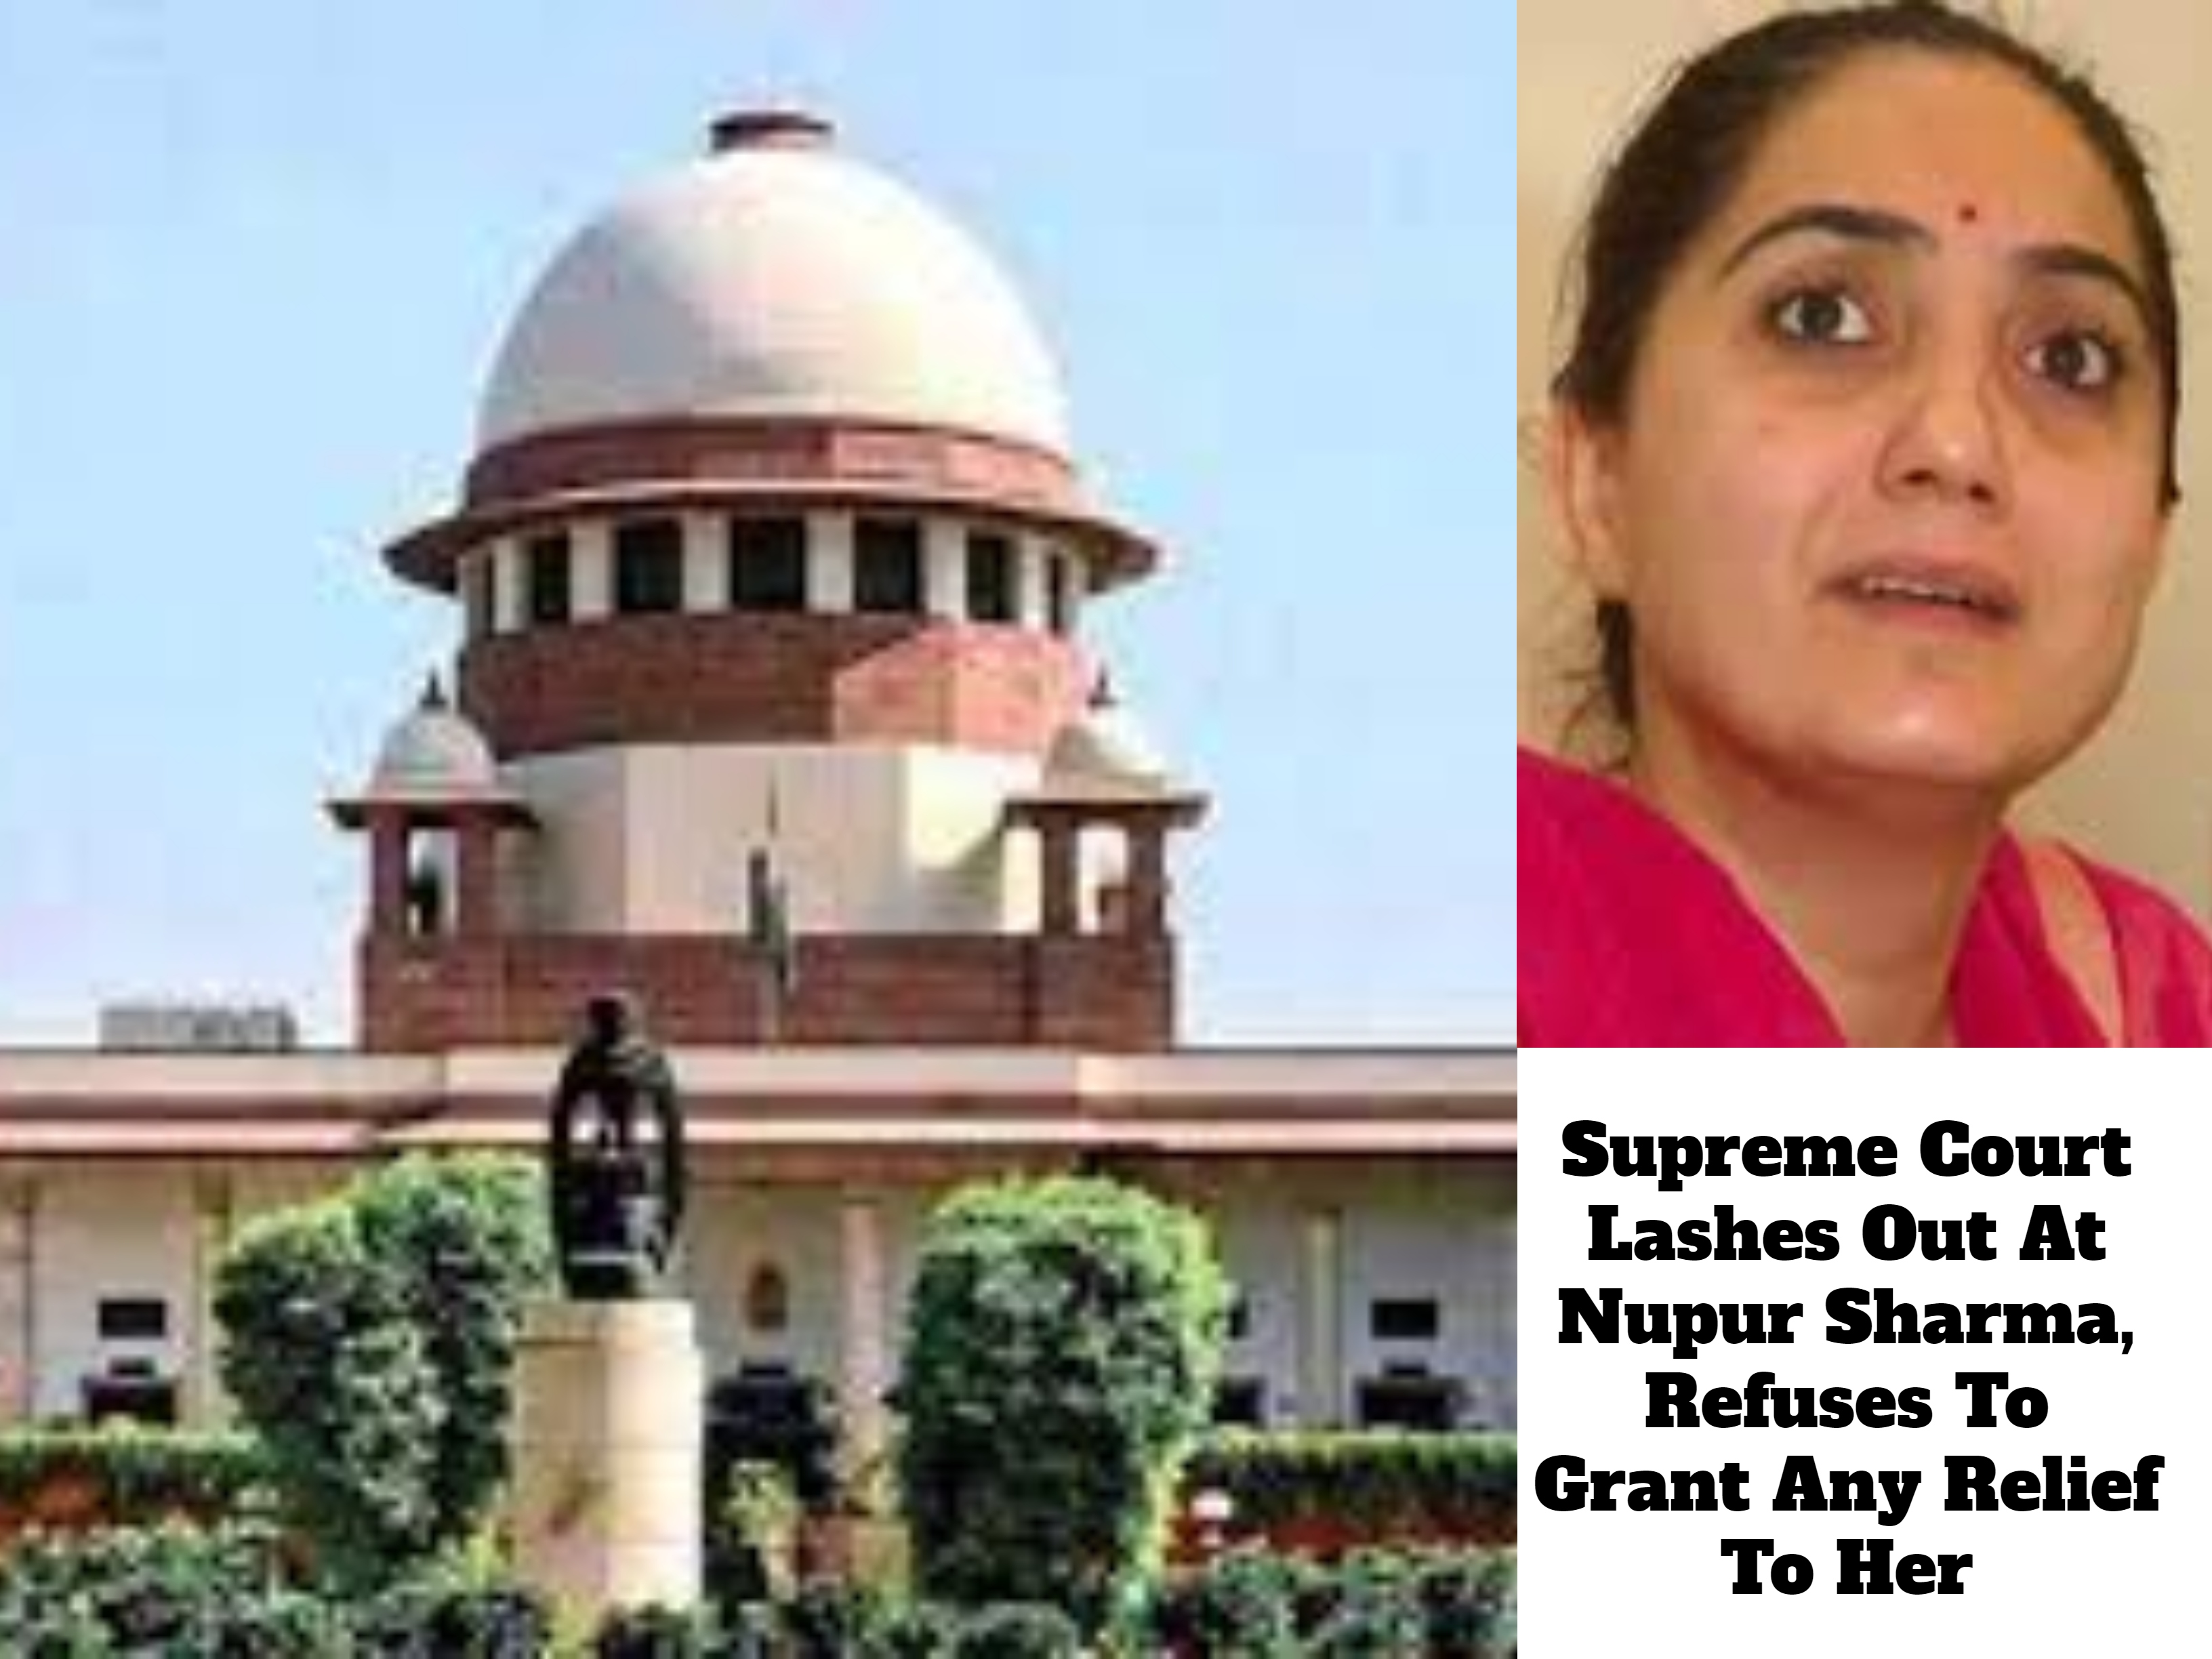 Supreme Court Questions Why Nupur Sharma Has Not Been Arrested Yet